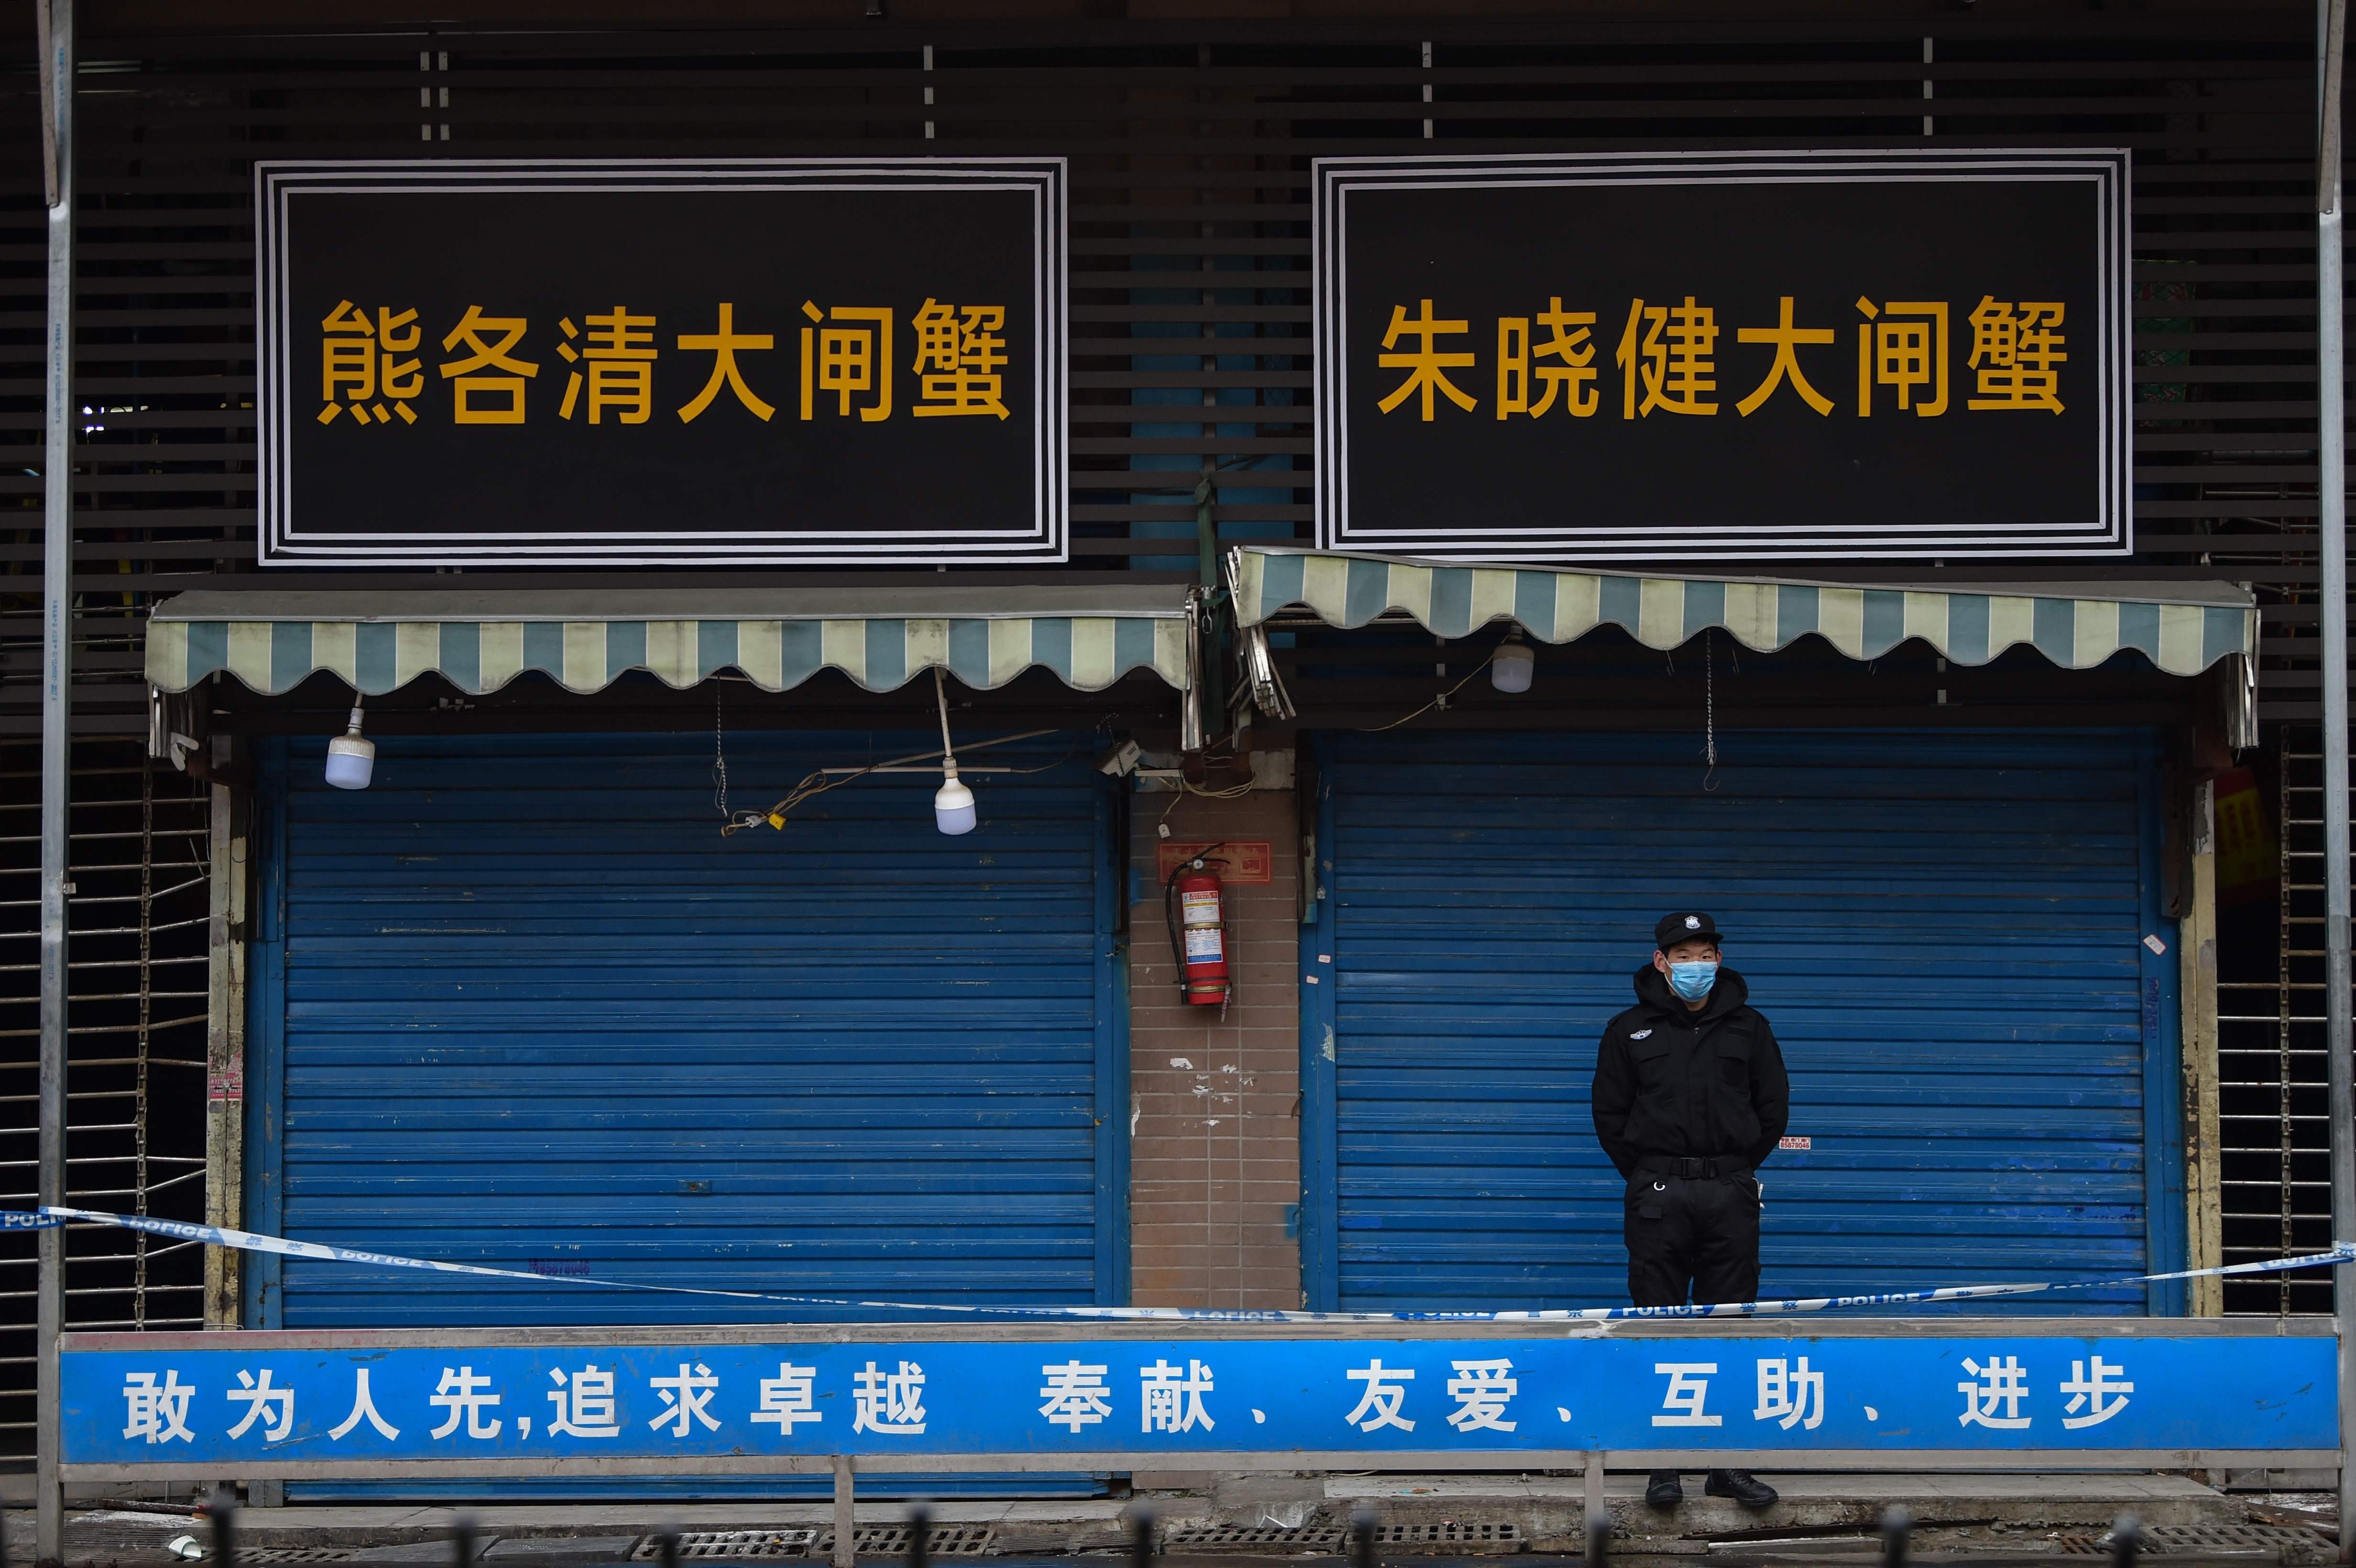 The Huanan Seafood Wholesale Market in Wuhan, closed on January 1, is thought to be ground zero in the spread of the deadly coronavirus named 2019-nCoV. Photo: AFP